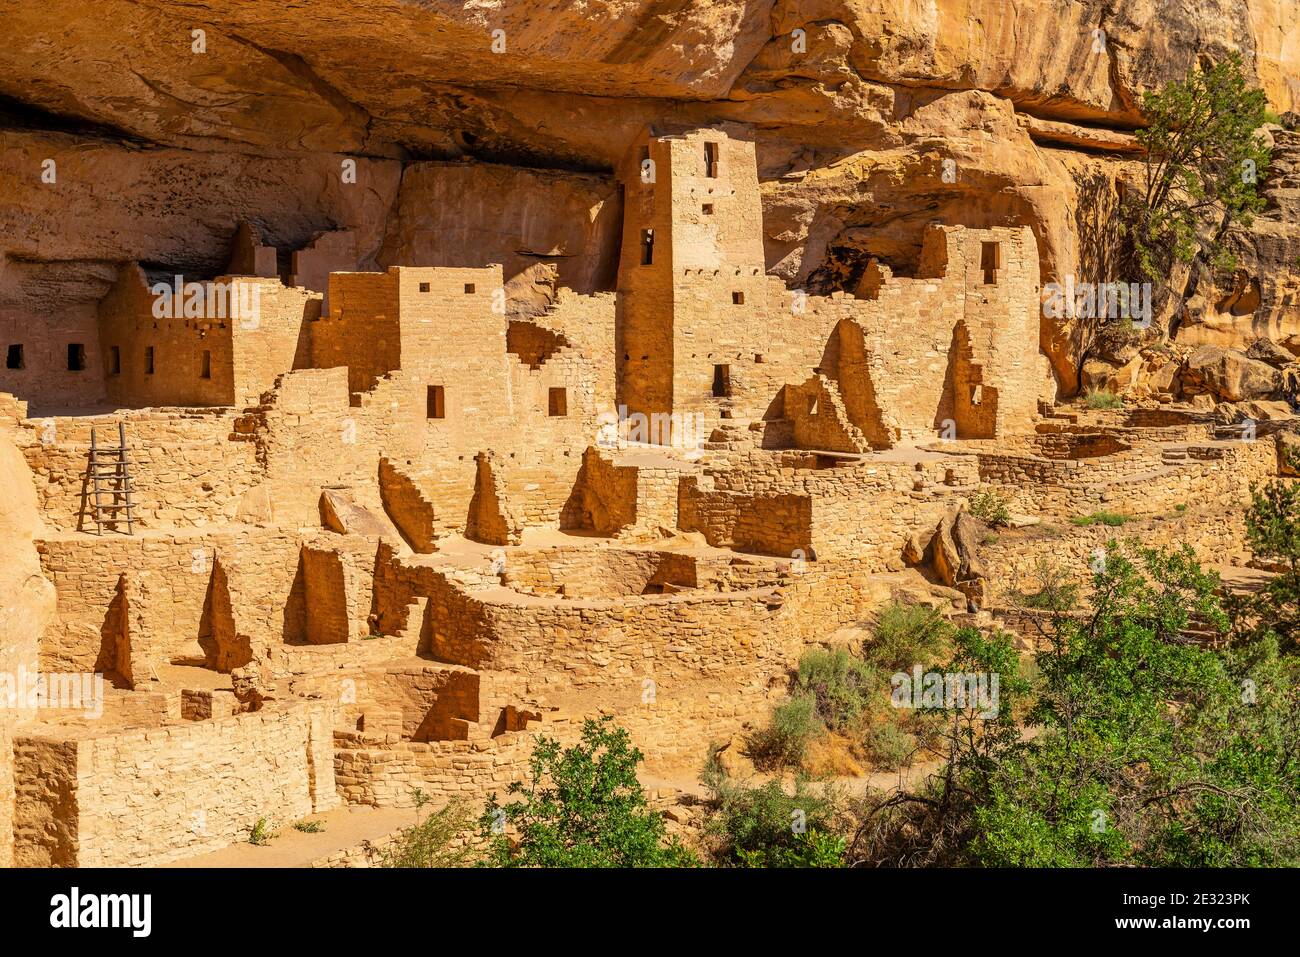 Cliff Palace of the Puebloan civilization, Mesa Verde national park, Colorado, United States of America (USA). Stock Photo